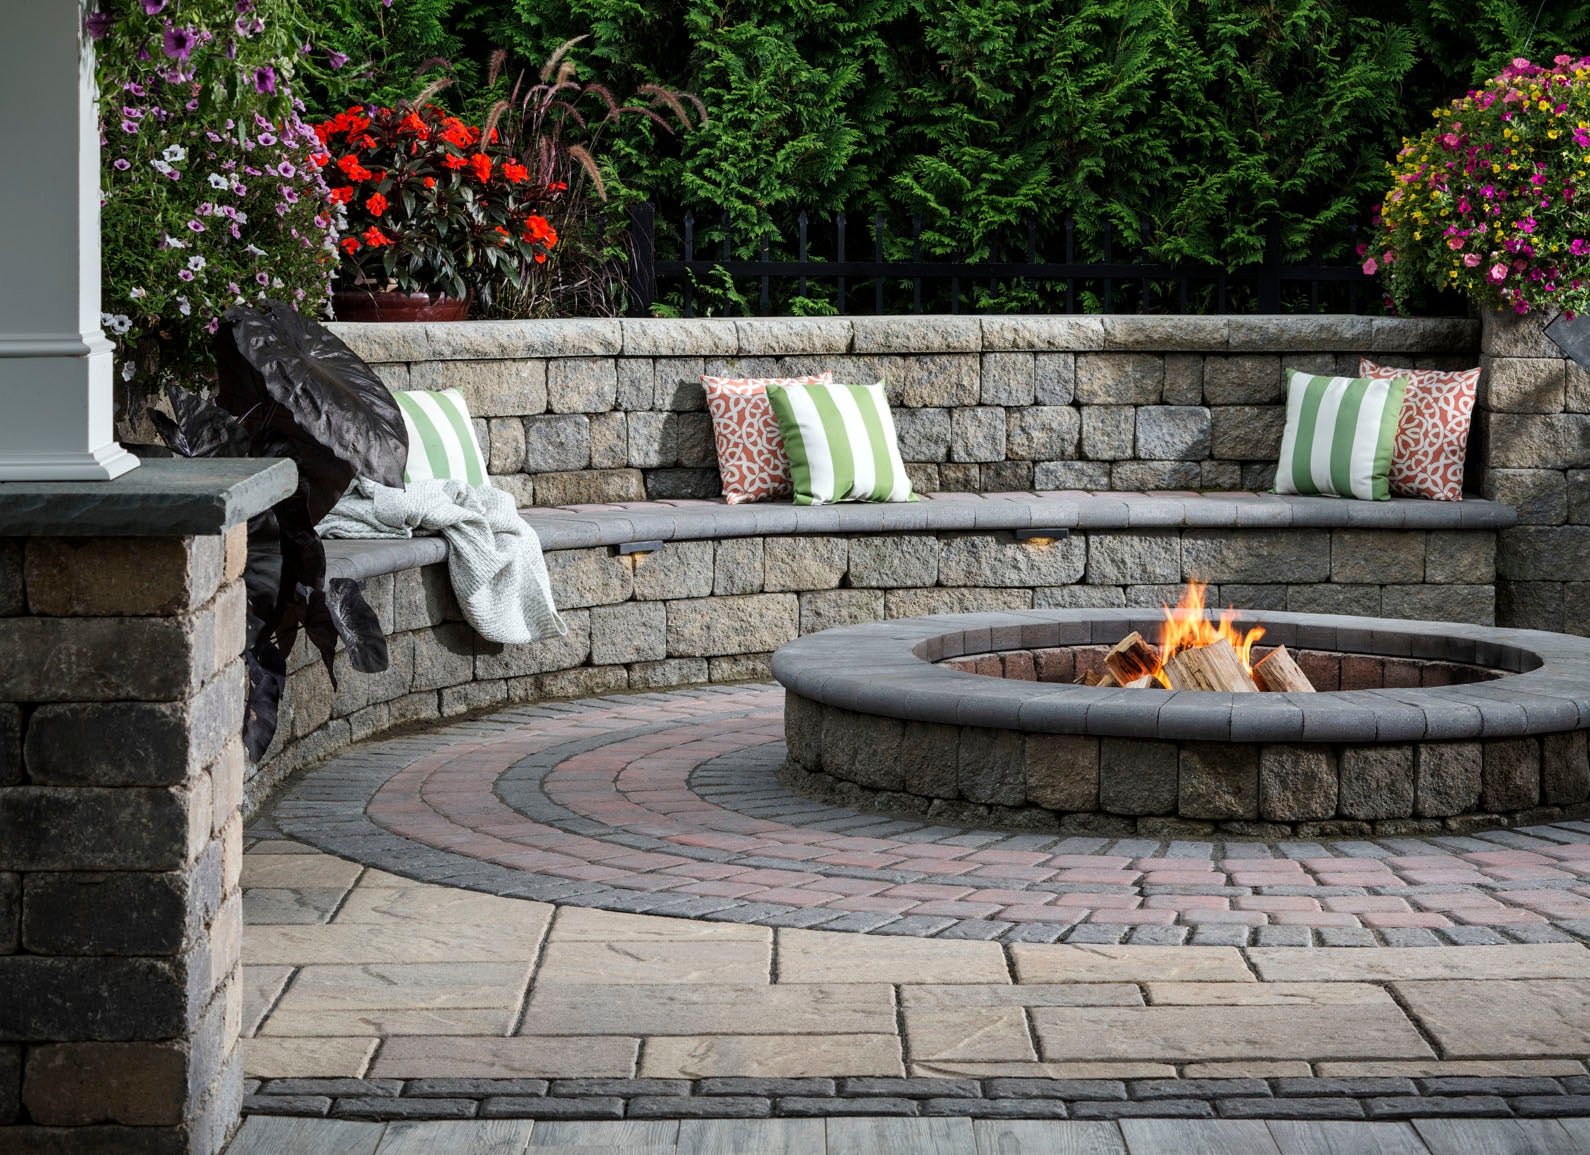 Designing A Patio Around Fire Pit, Will A Fire Pit Damage My Porcelain Patio